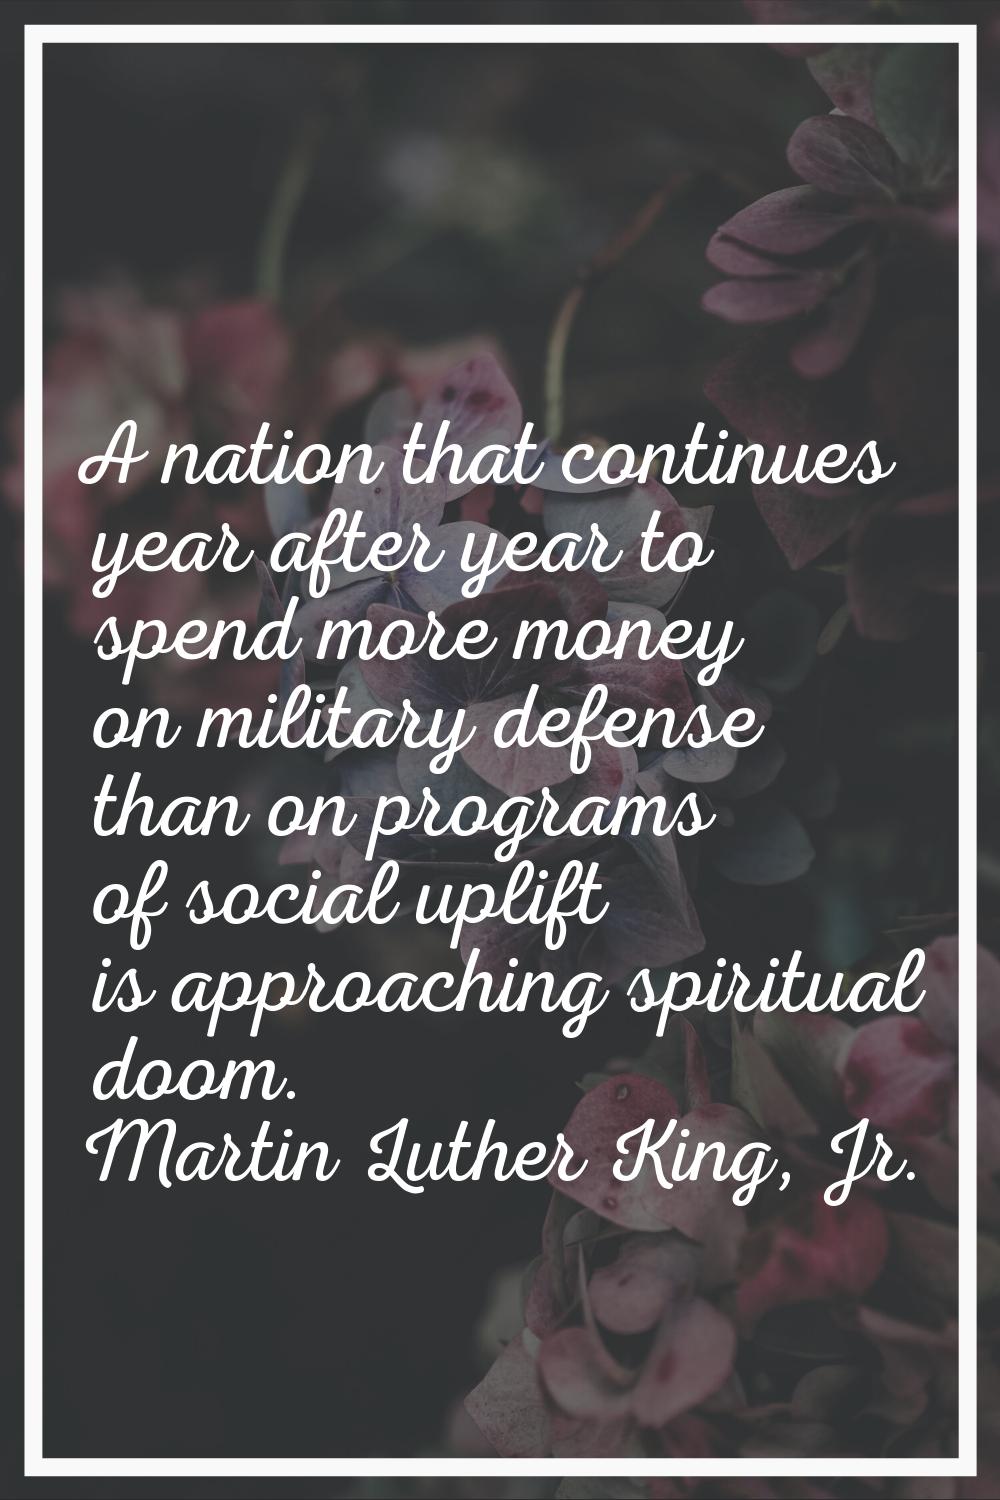 A nation that continues year after year to spend more money on military defense than on programs of